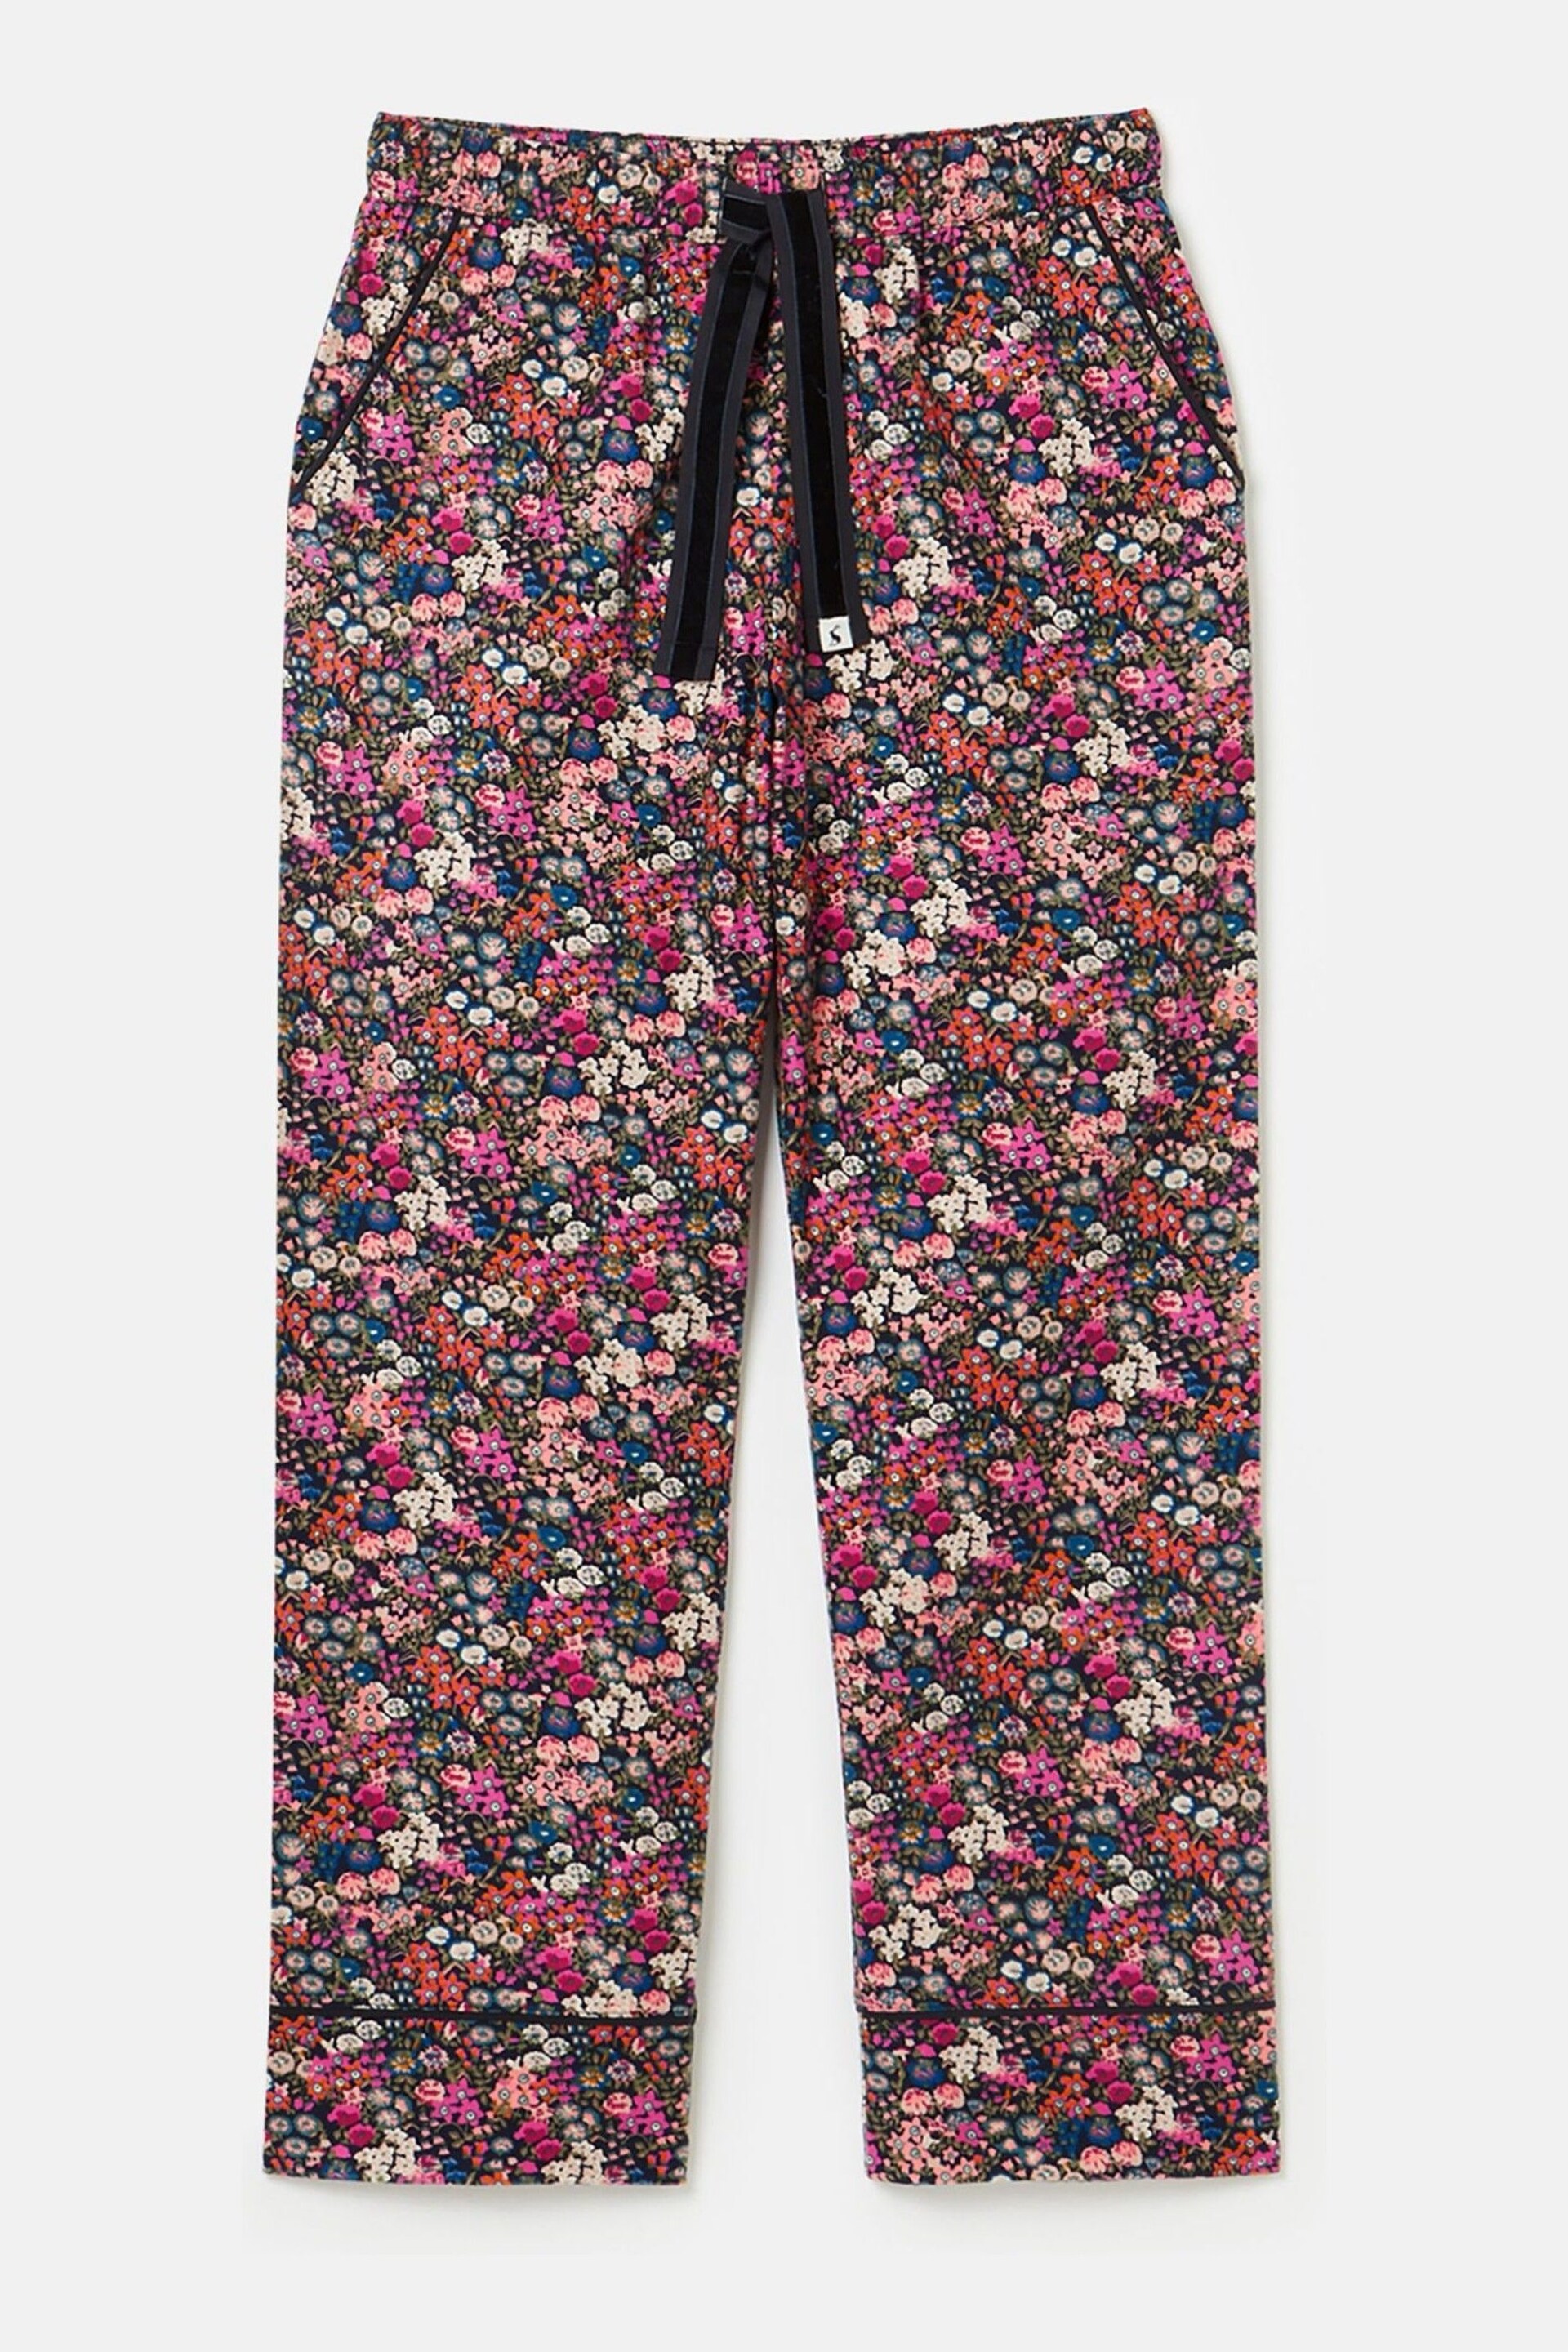 Joules Stella Navy Floral Cotton Pyjama Bottoms - Image 7 of 7